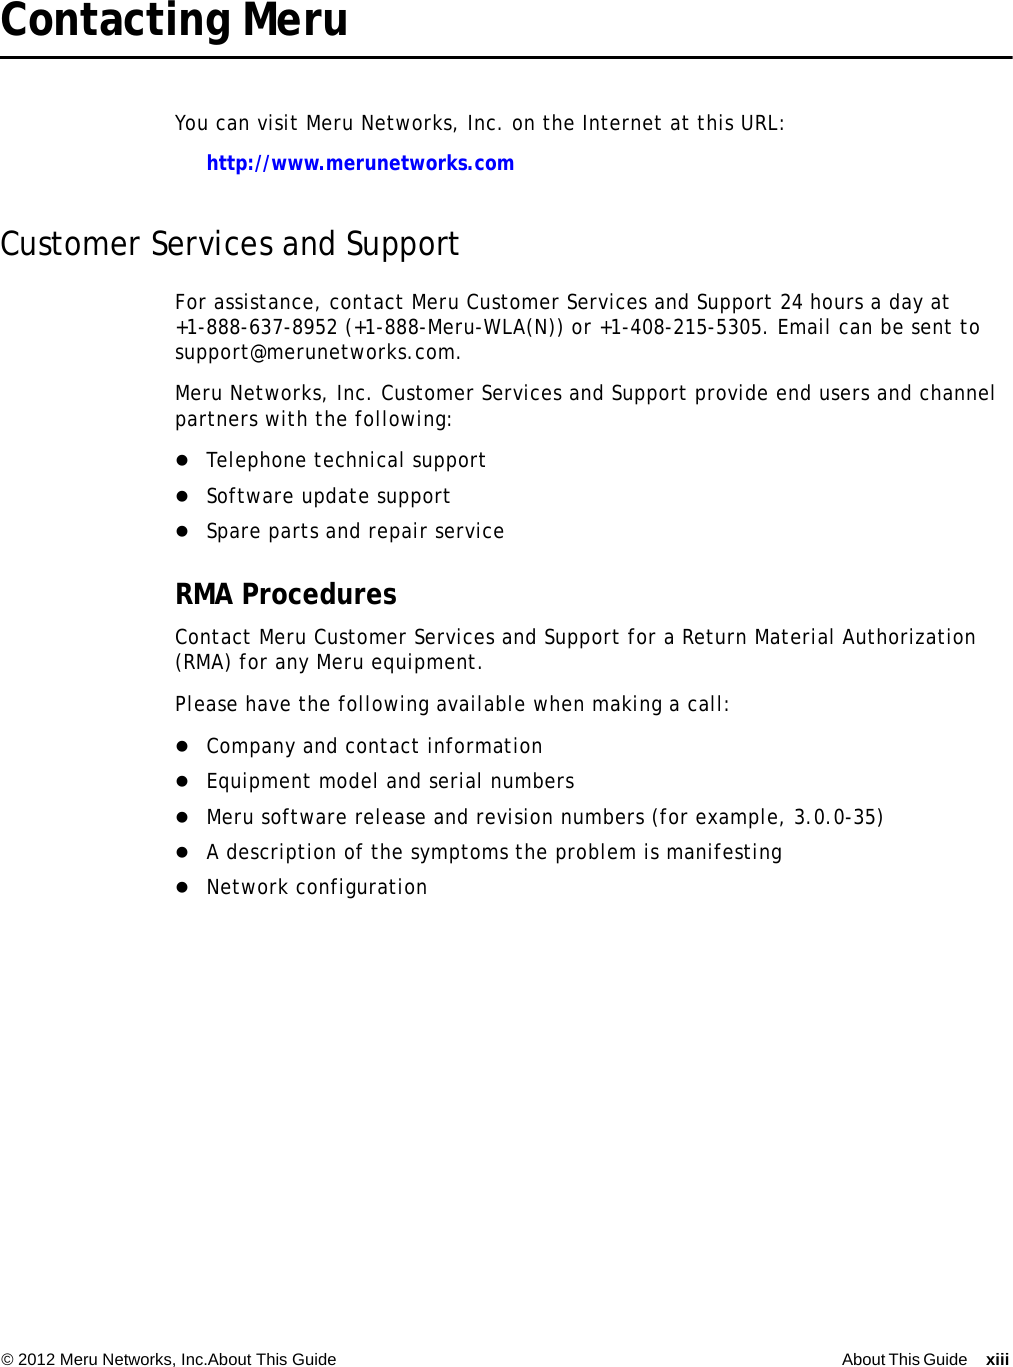 © 2012 Meru Networks, Inc.About This Guide About This Guide xiii  Contacting Meru You can visit Meru Networks, Inc. on the Internet at this URL:http://www.merunetworks.comCustomer Services and SupportFor assistance, contact Meru Customer Services and Support 24 hours a day at+1-888-637-8952 (+1-888-Meru-WLA(N)) or +1-408-215-5305. Email can be sent to support@merunetworks.com.Meru Networks, Inc. Customer Services and Support provide end users and channel partners with the following:Telephone technical supportSoftware update supportSpare parts and repair serviceRMA ProceduresContact Meru Customer Services and Support for a Return Material Authorization (RMA) for any Meru equipment.Please have the following available when making a call:Company and contact informationEquipment model and serial numbersMeru software release and revision numbers (for example, 3.0.0-35)A description of the symptoms the problem is manifestingNetwork configuration